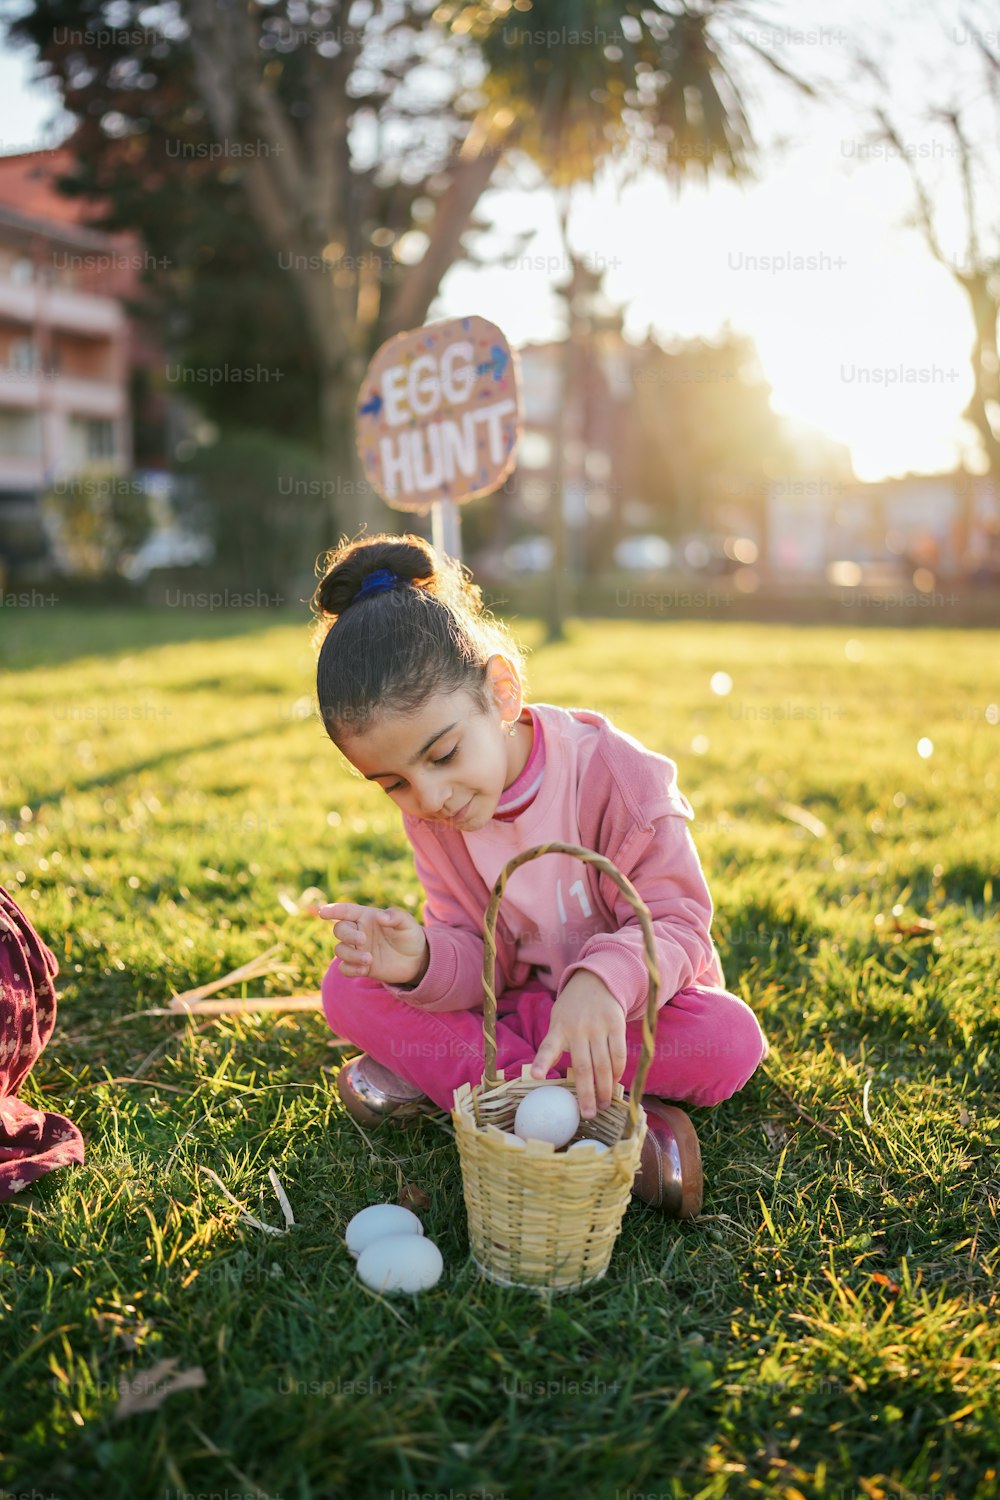 a little girl sitting in the grass with a basket of eggs